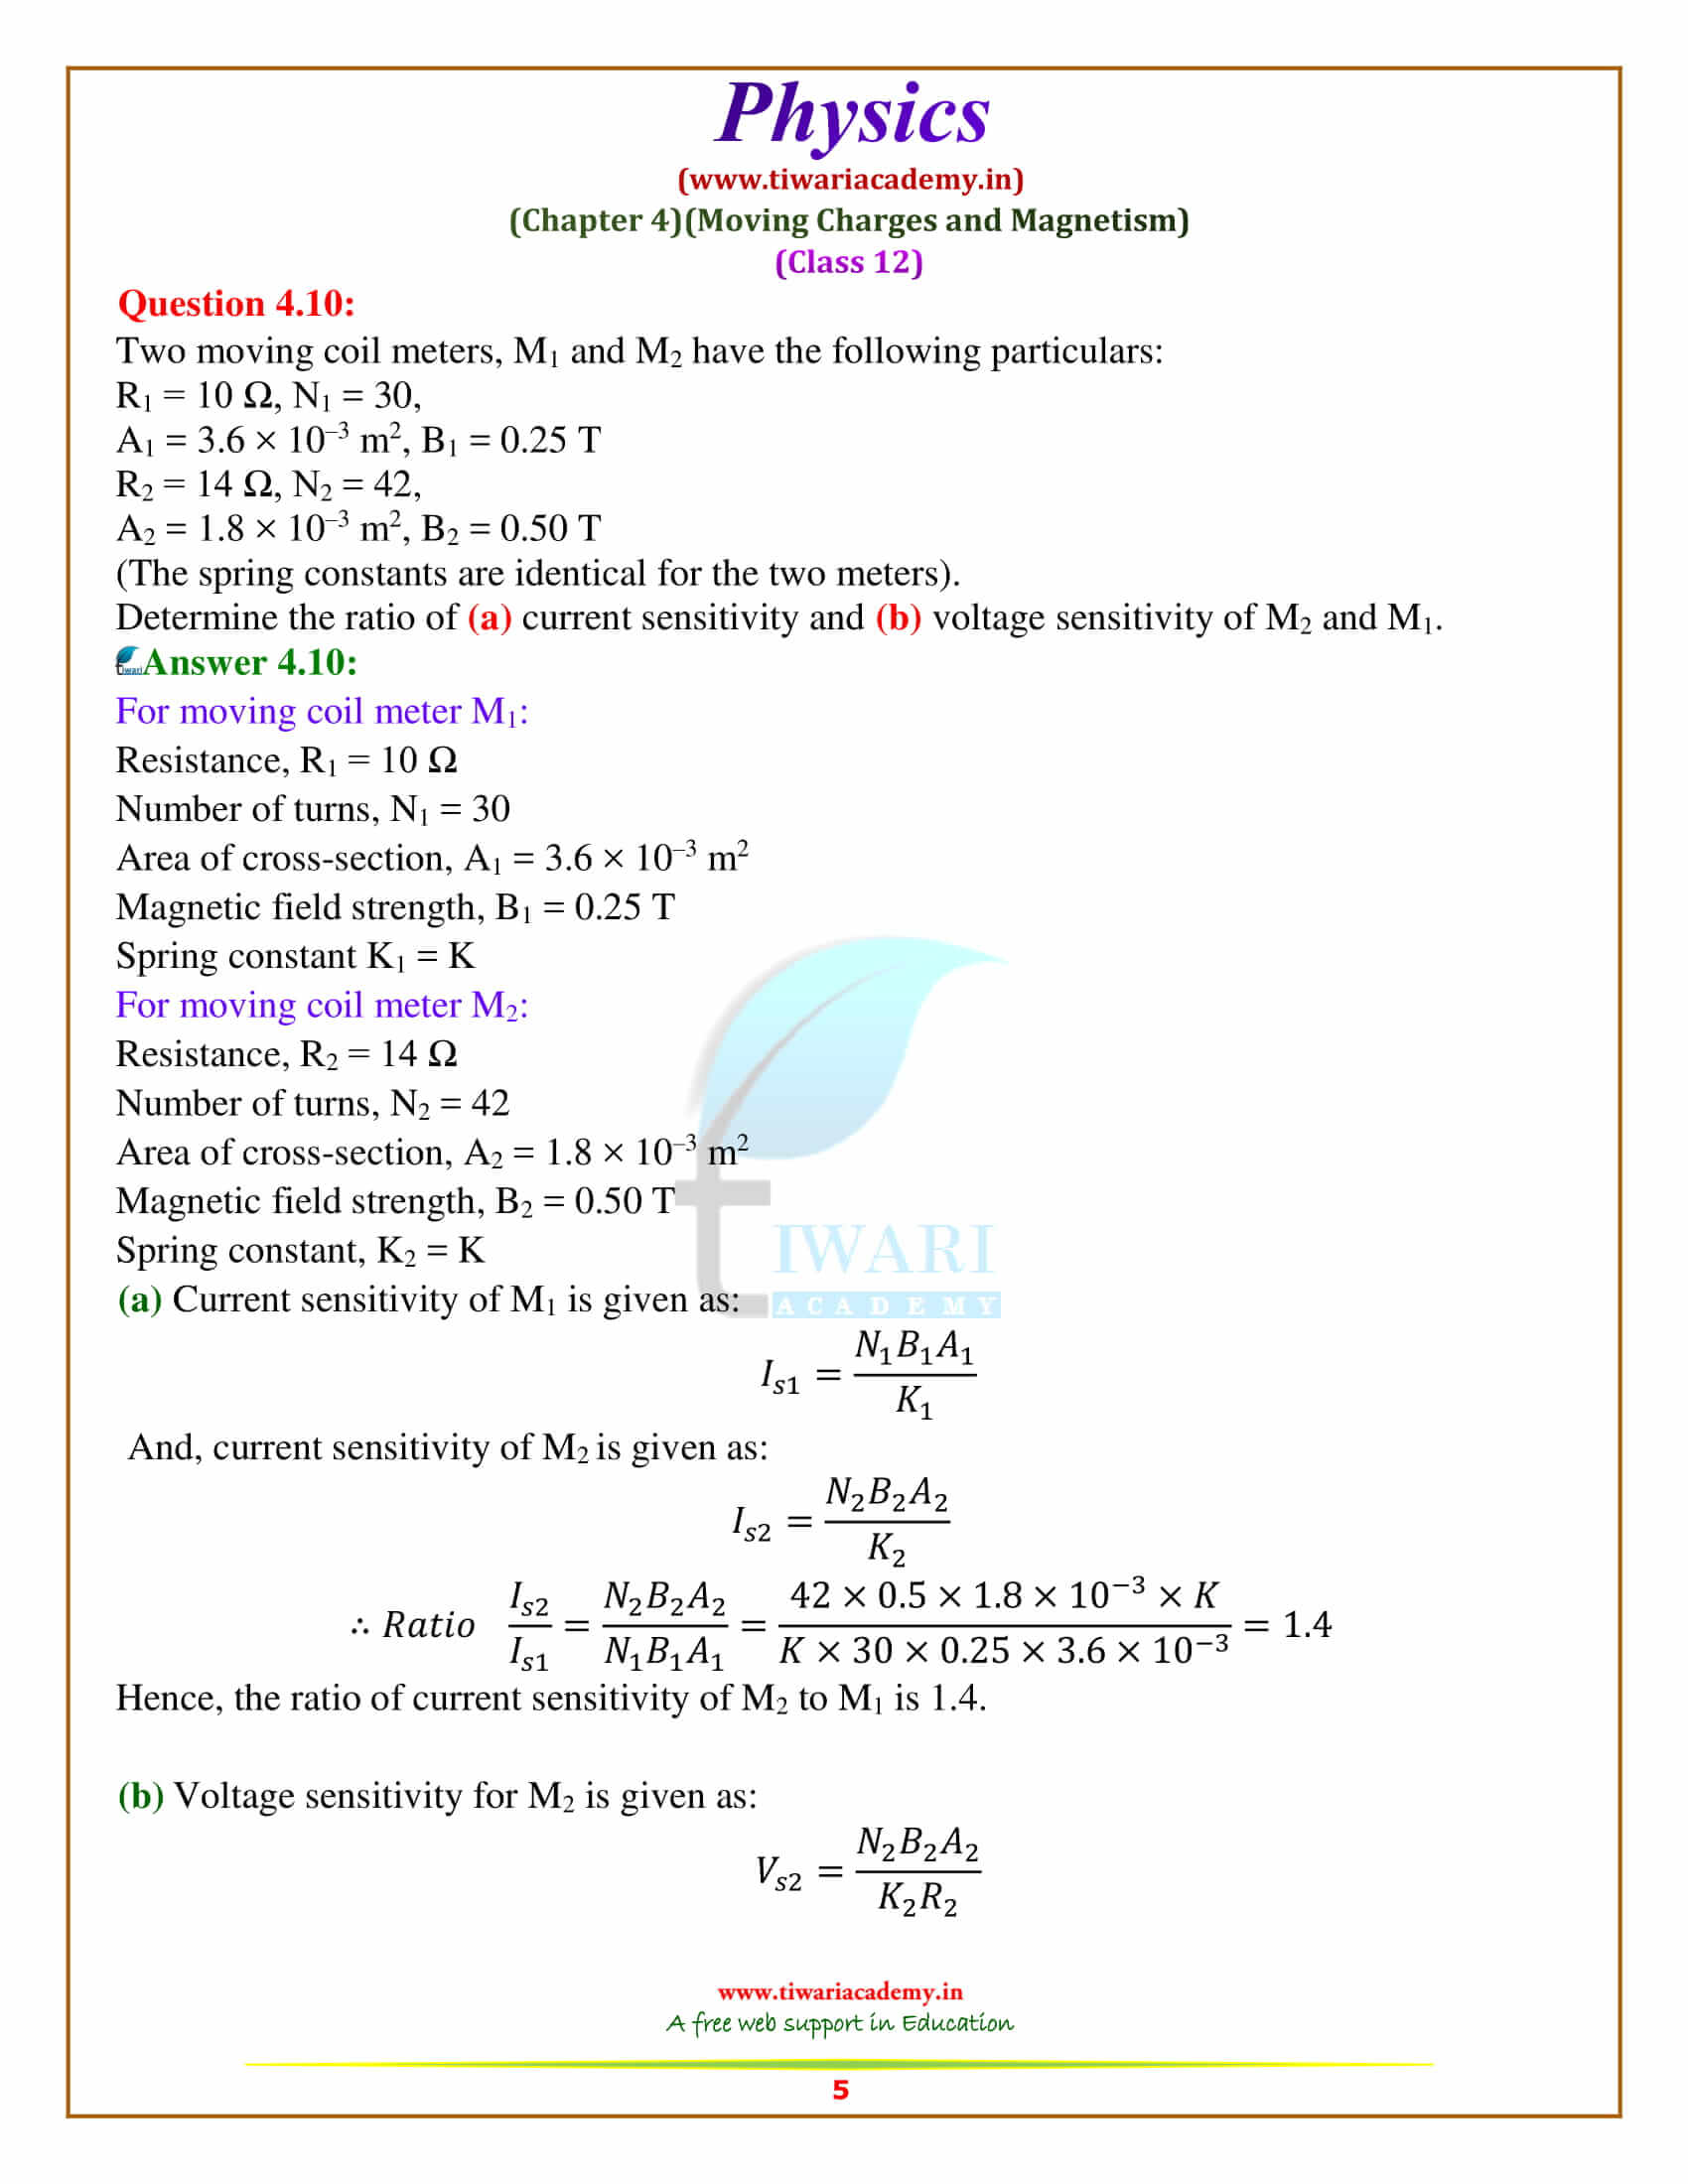 NCERT Solutions for Class 12 Physics Chapter 4 in pdf form free download